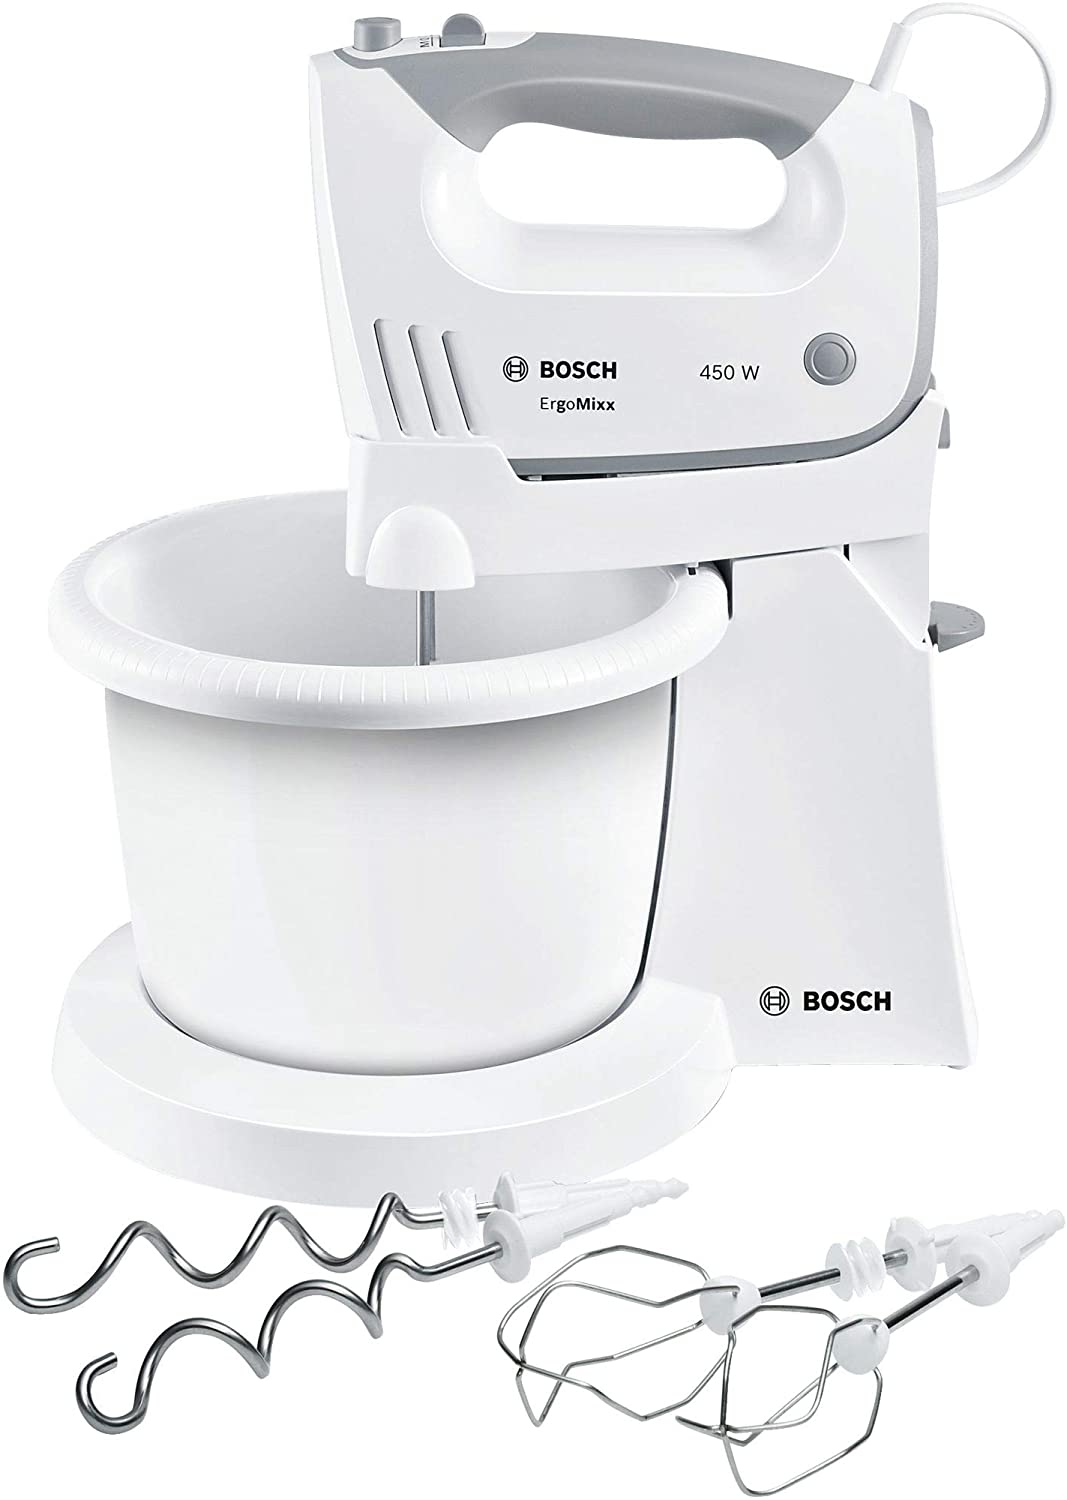 Bosch MFQ364V0 Ergomixx Hand Mixer, Vacuum System, 450 W, Vacuum Pump, Bags and Boxes, Mixing Stick, White